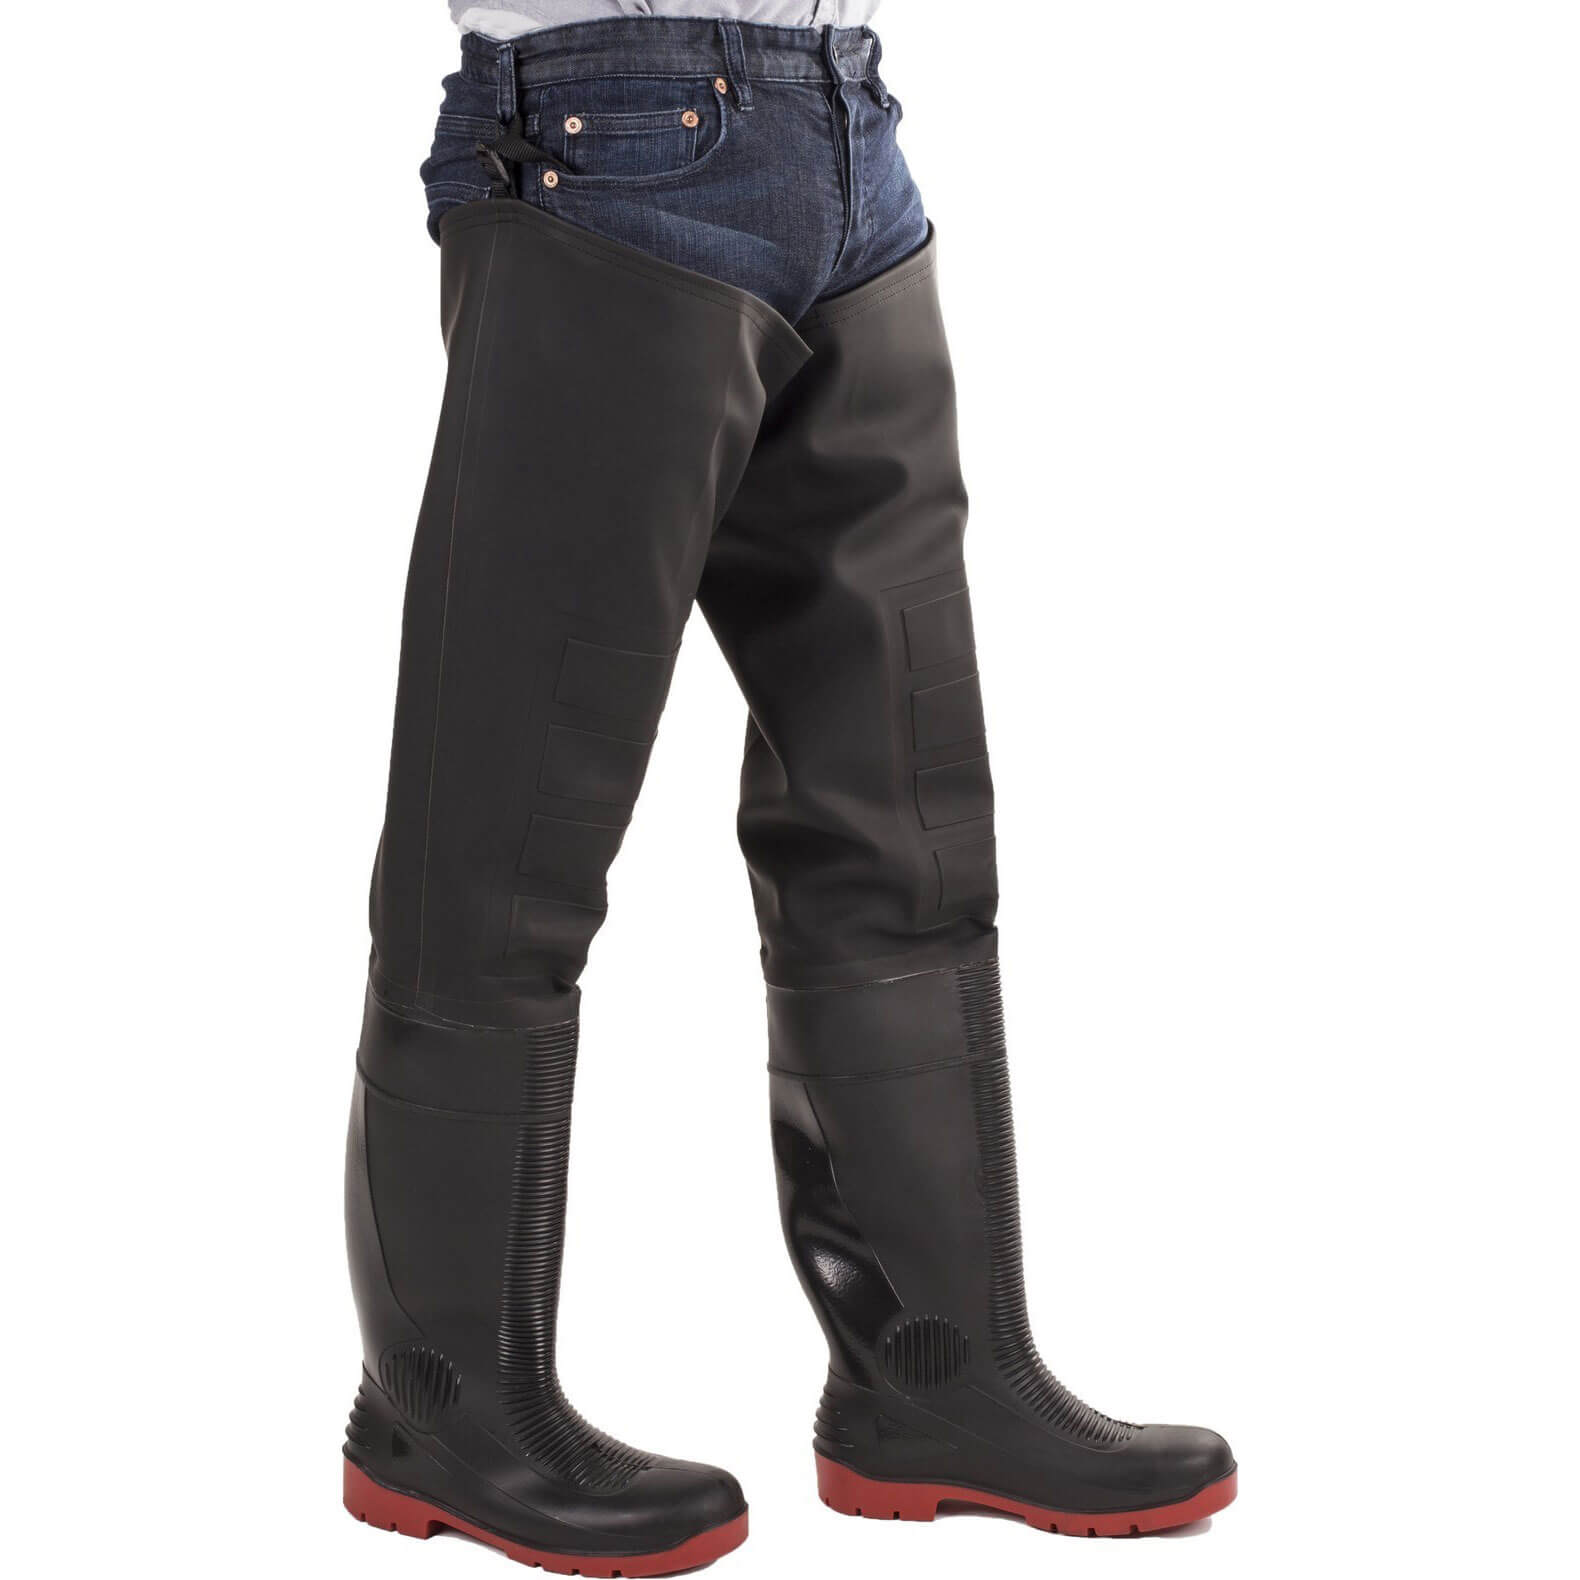 Image of Amblers Safety Rhone Thigh Safety Wader Black / Red Size 6